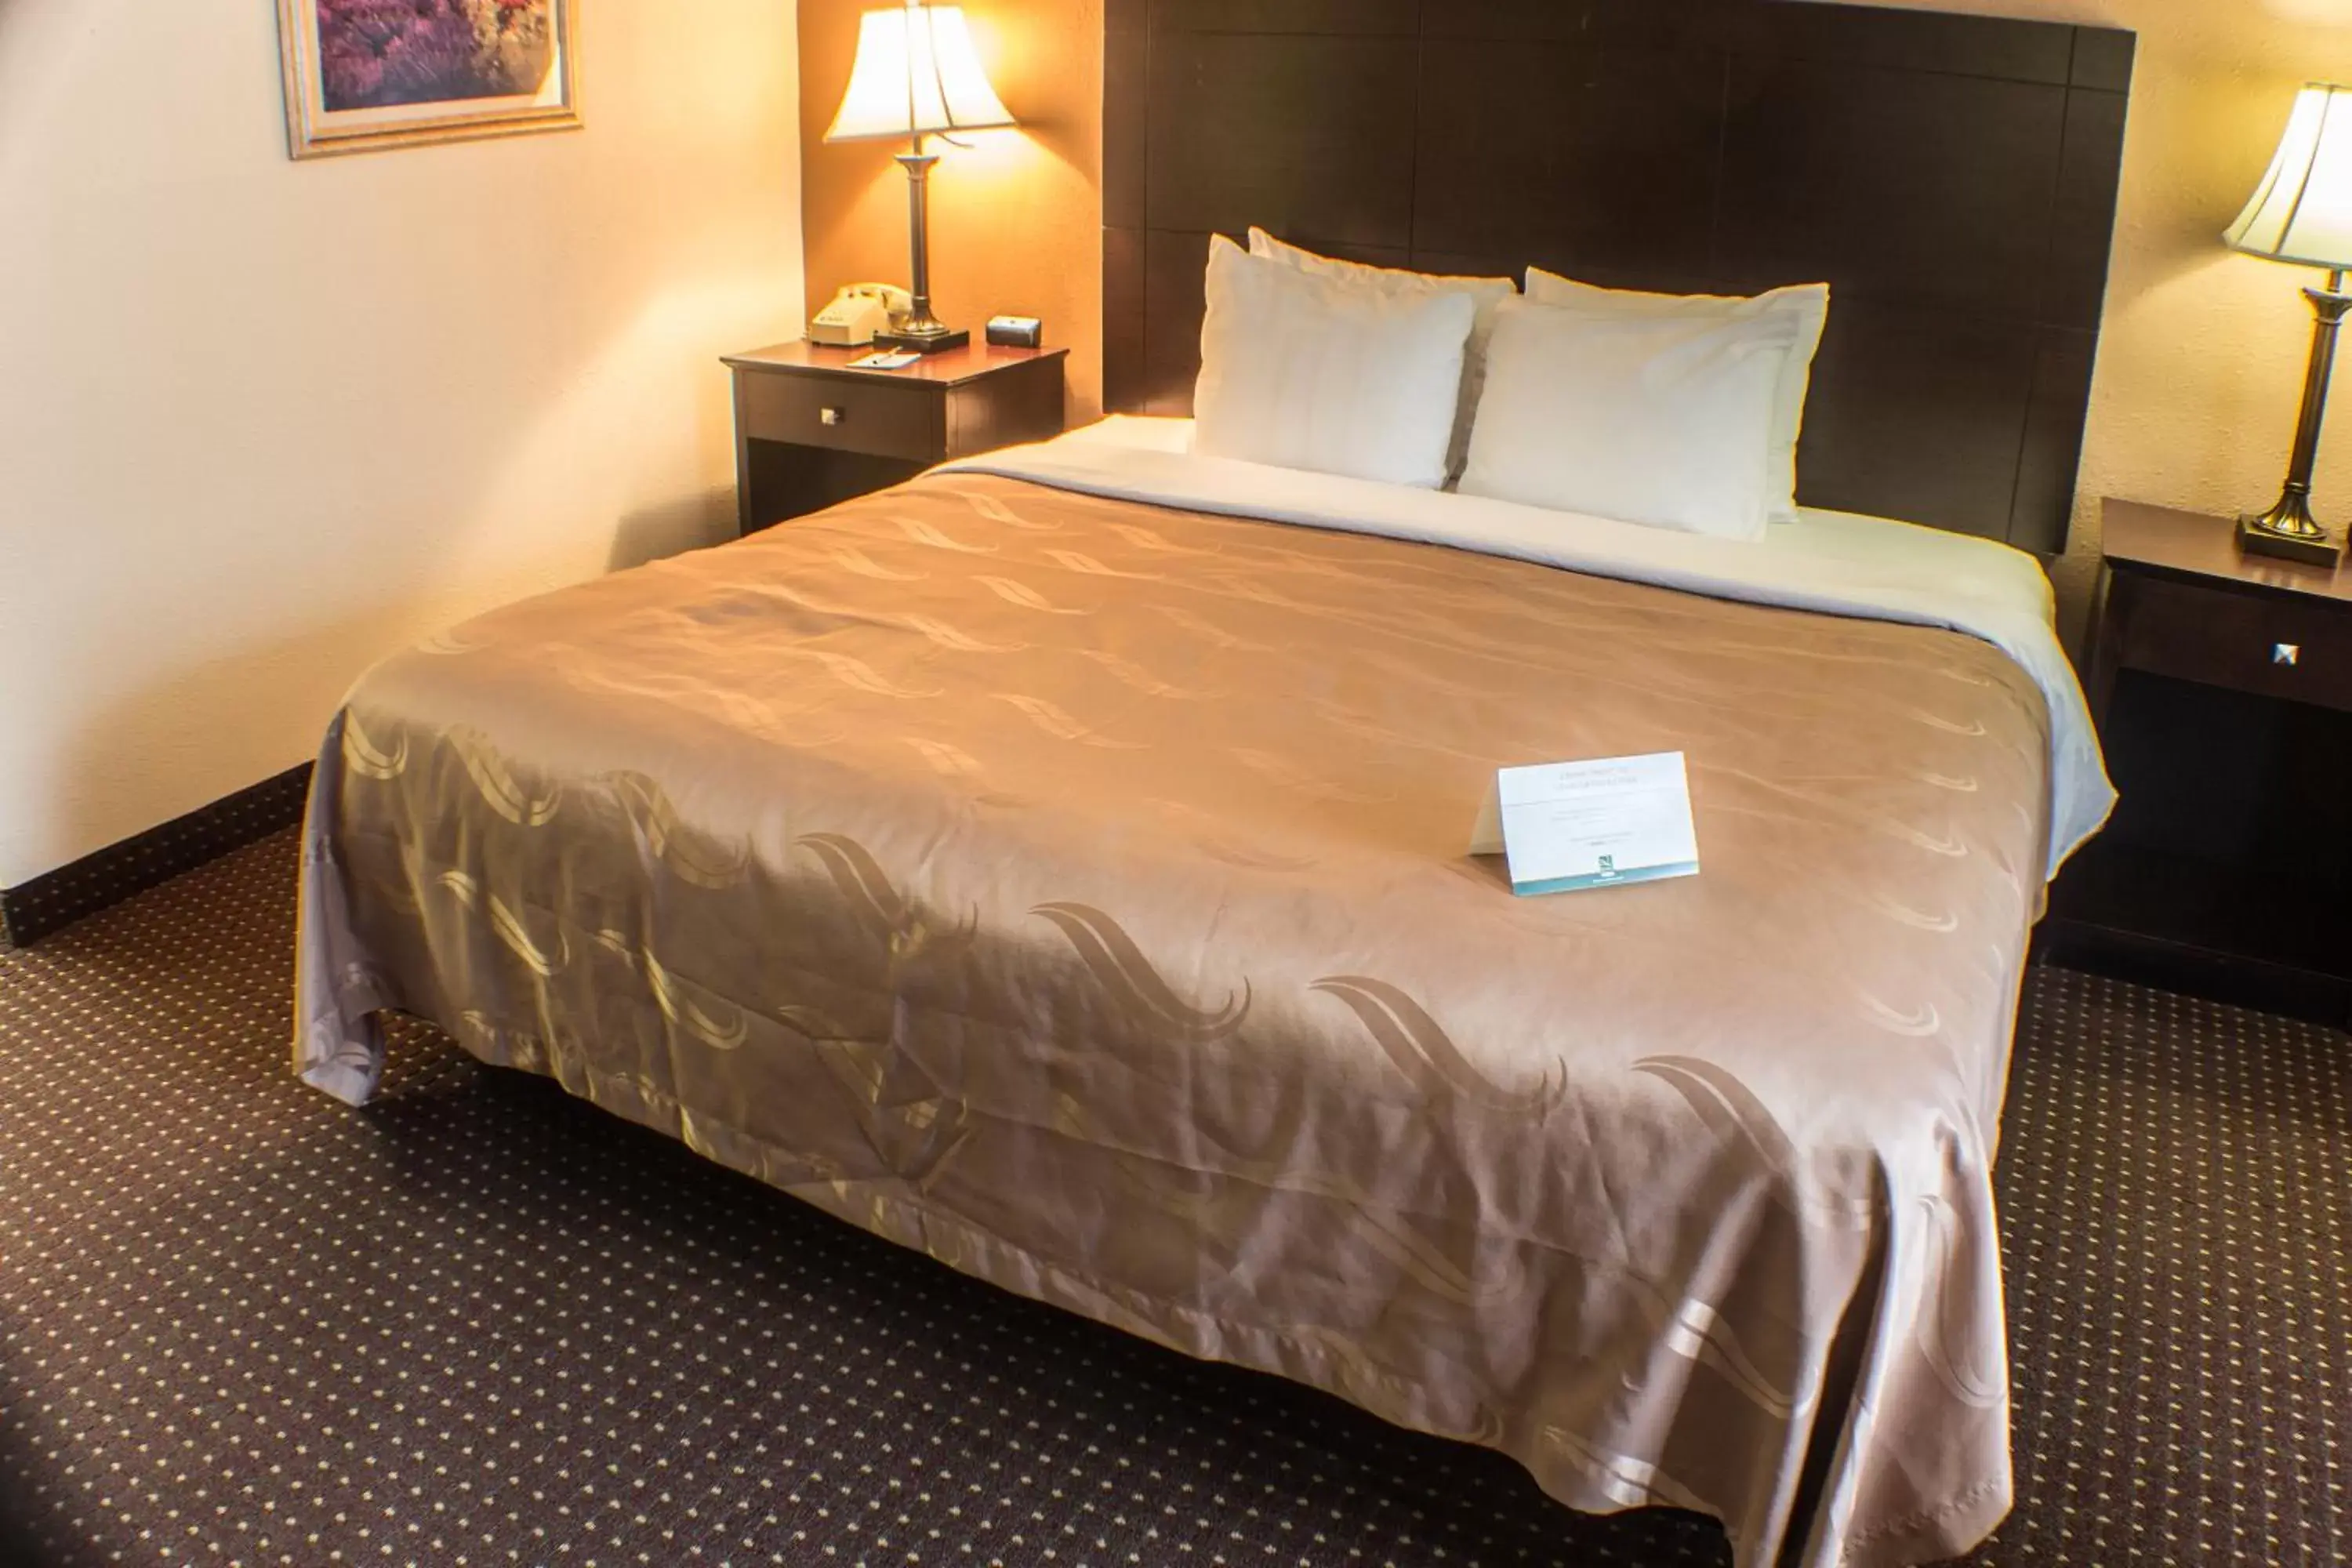 Standard King Room - Non-Smoking- Not Pet Friendly in Quality Inn & Suites Conference Center Across from Casino